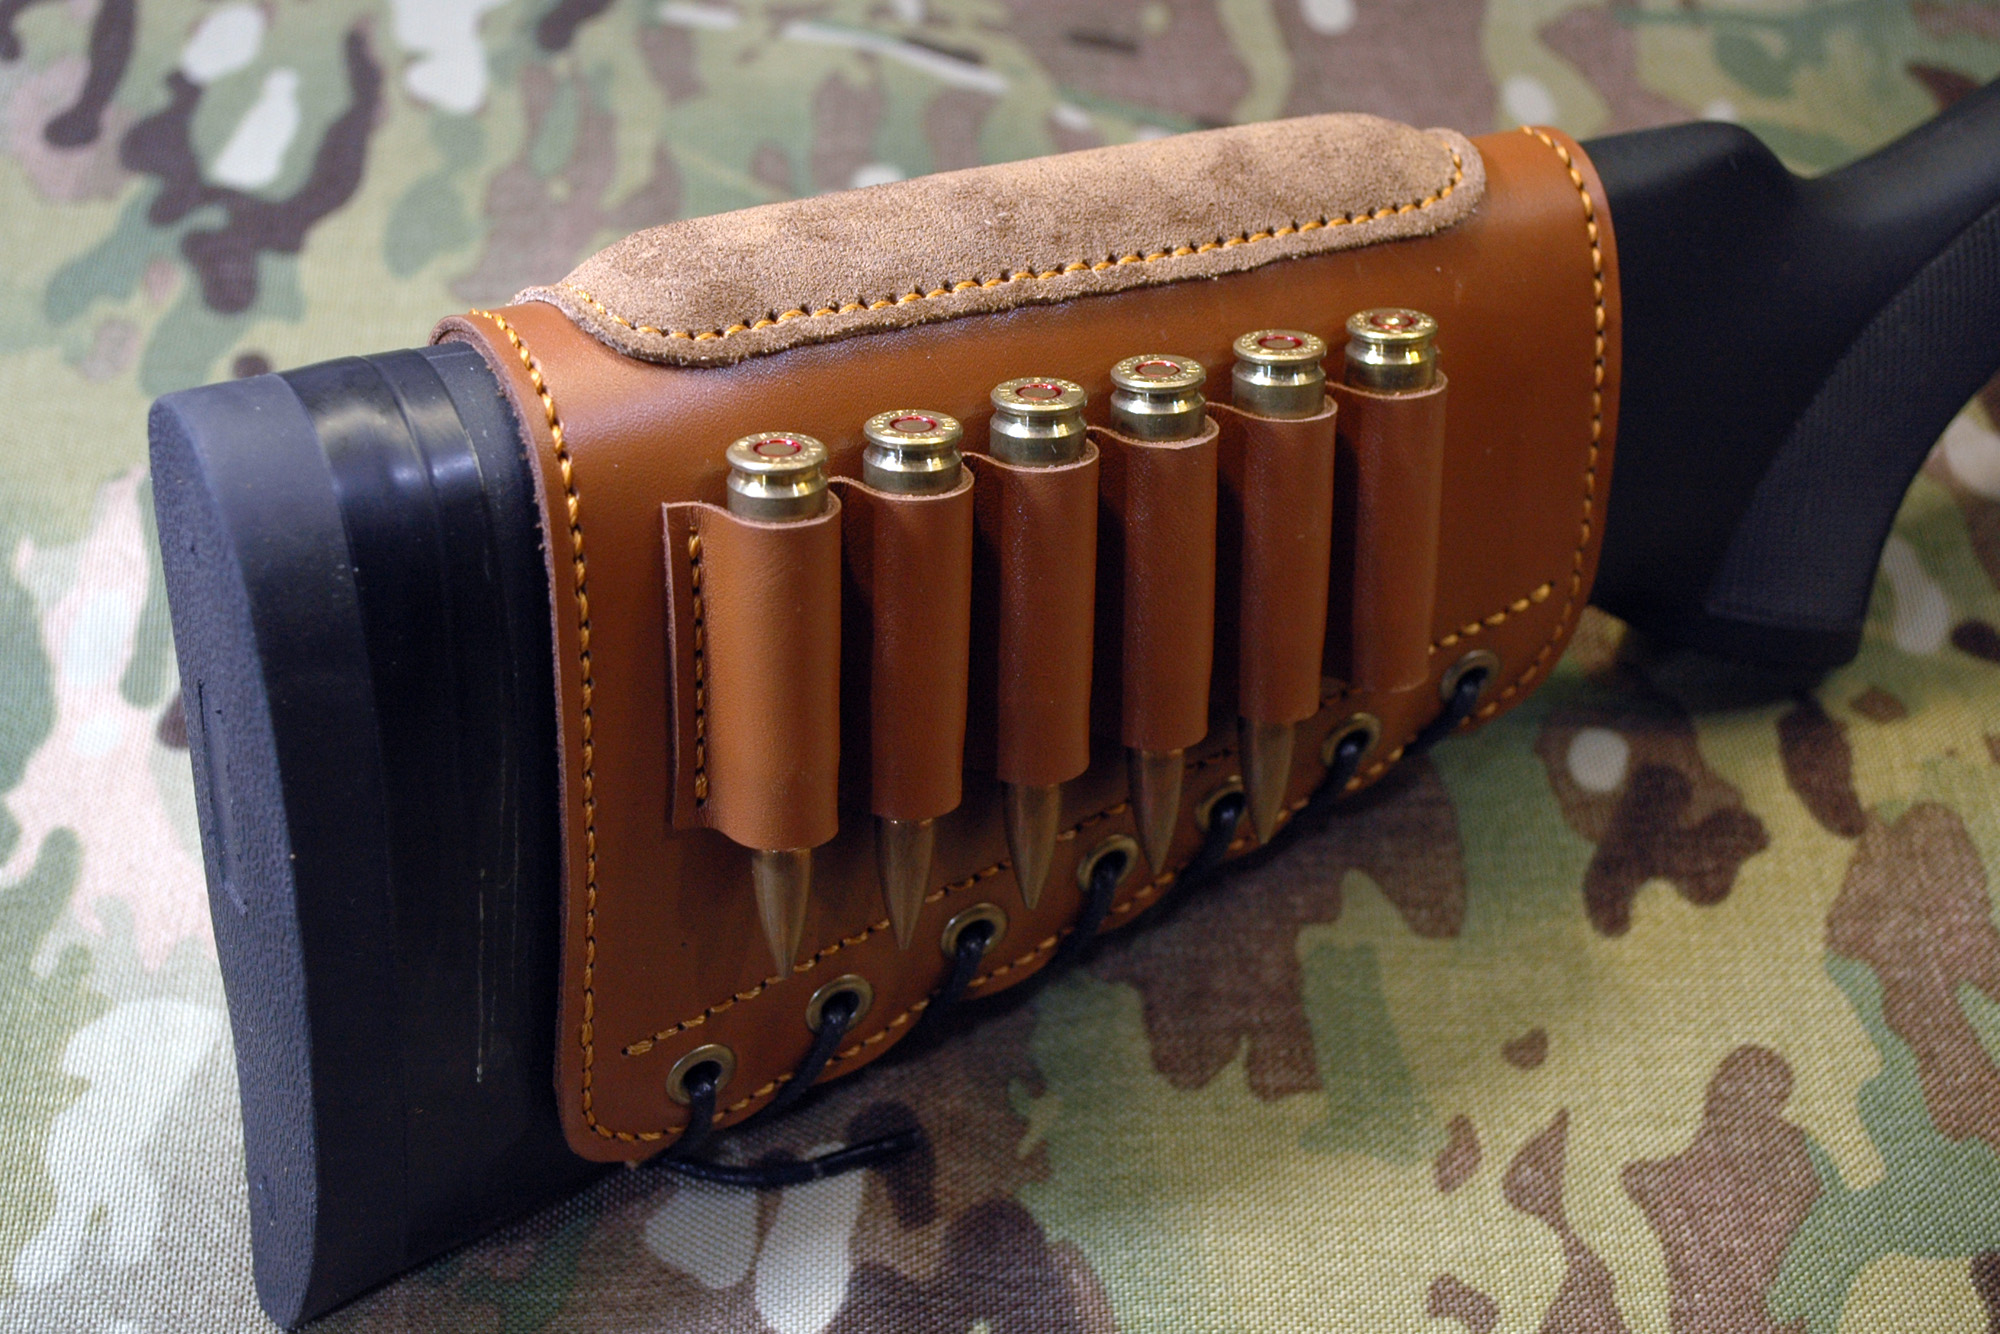 New Leather Rifle Cartridge Holder Pouch Belt Ammo 6 shells Made in Ukraine ! 